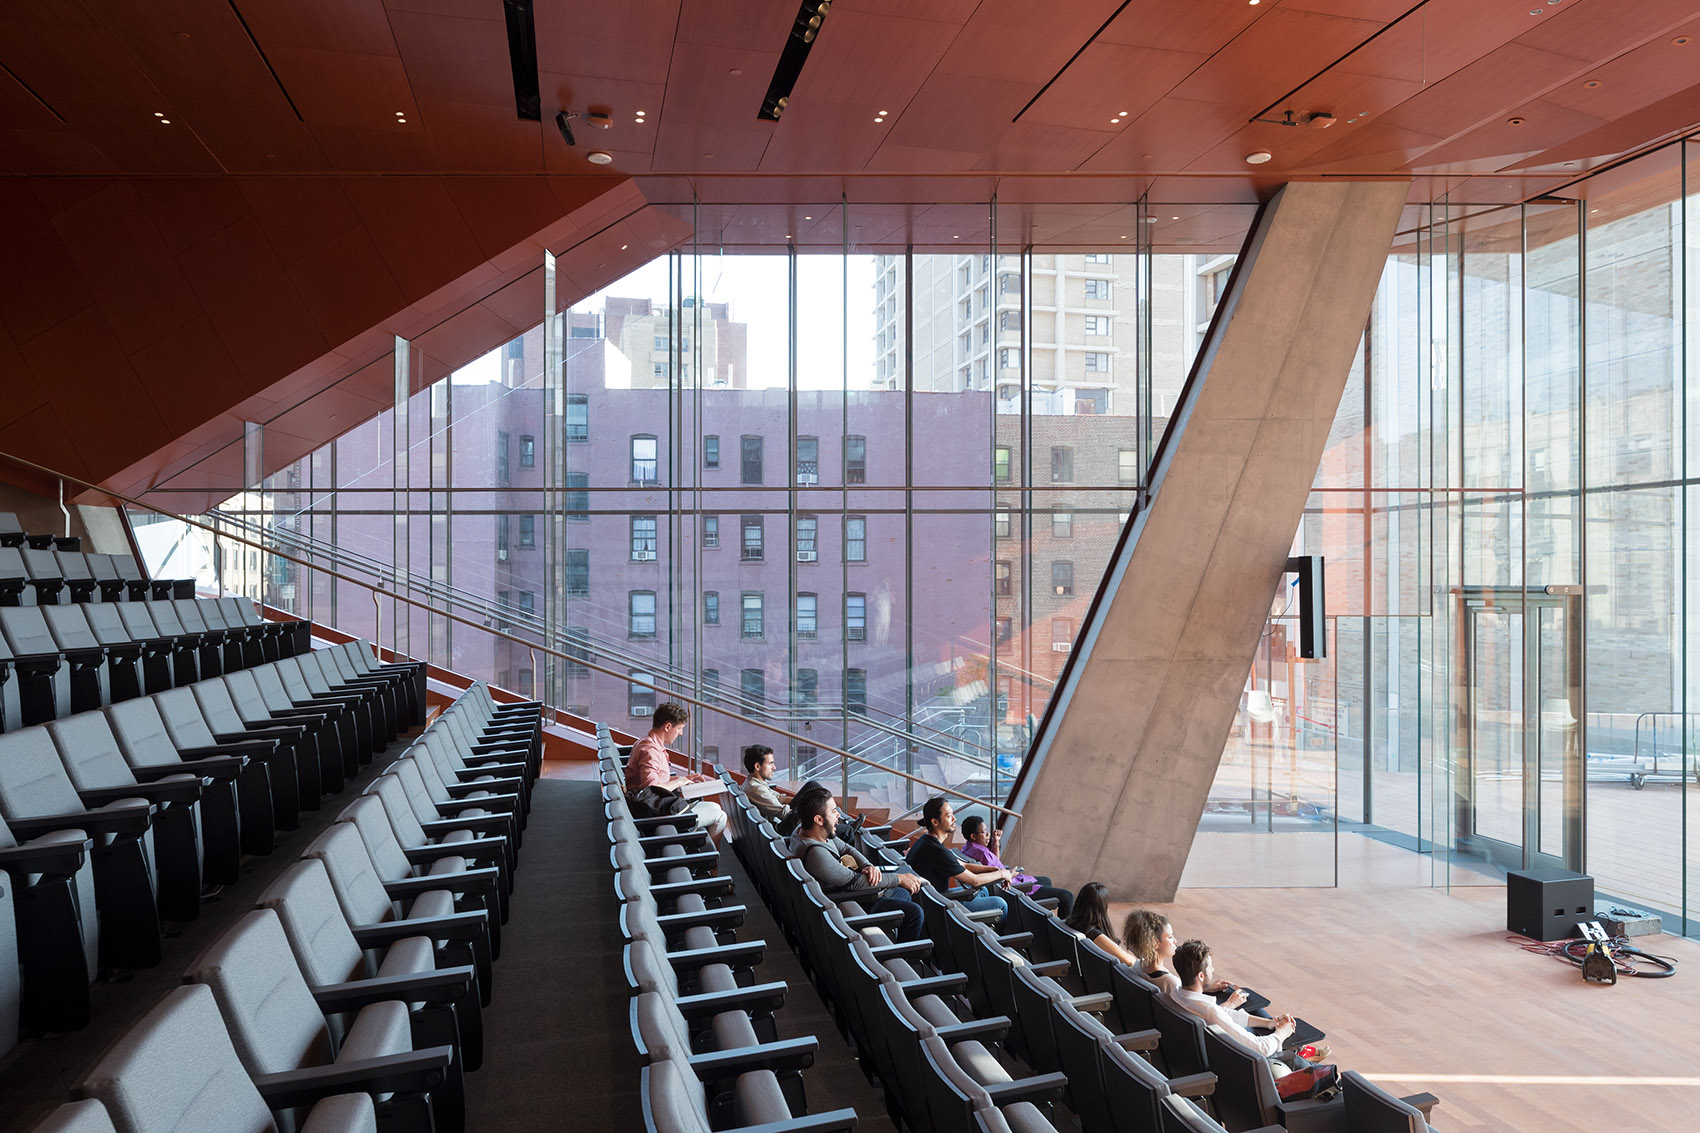 014-The-Roy-and-Diana-Vagelos-Education-Center-at-Columbia-University-by-Diller-.jpg